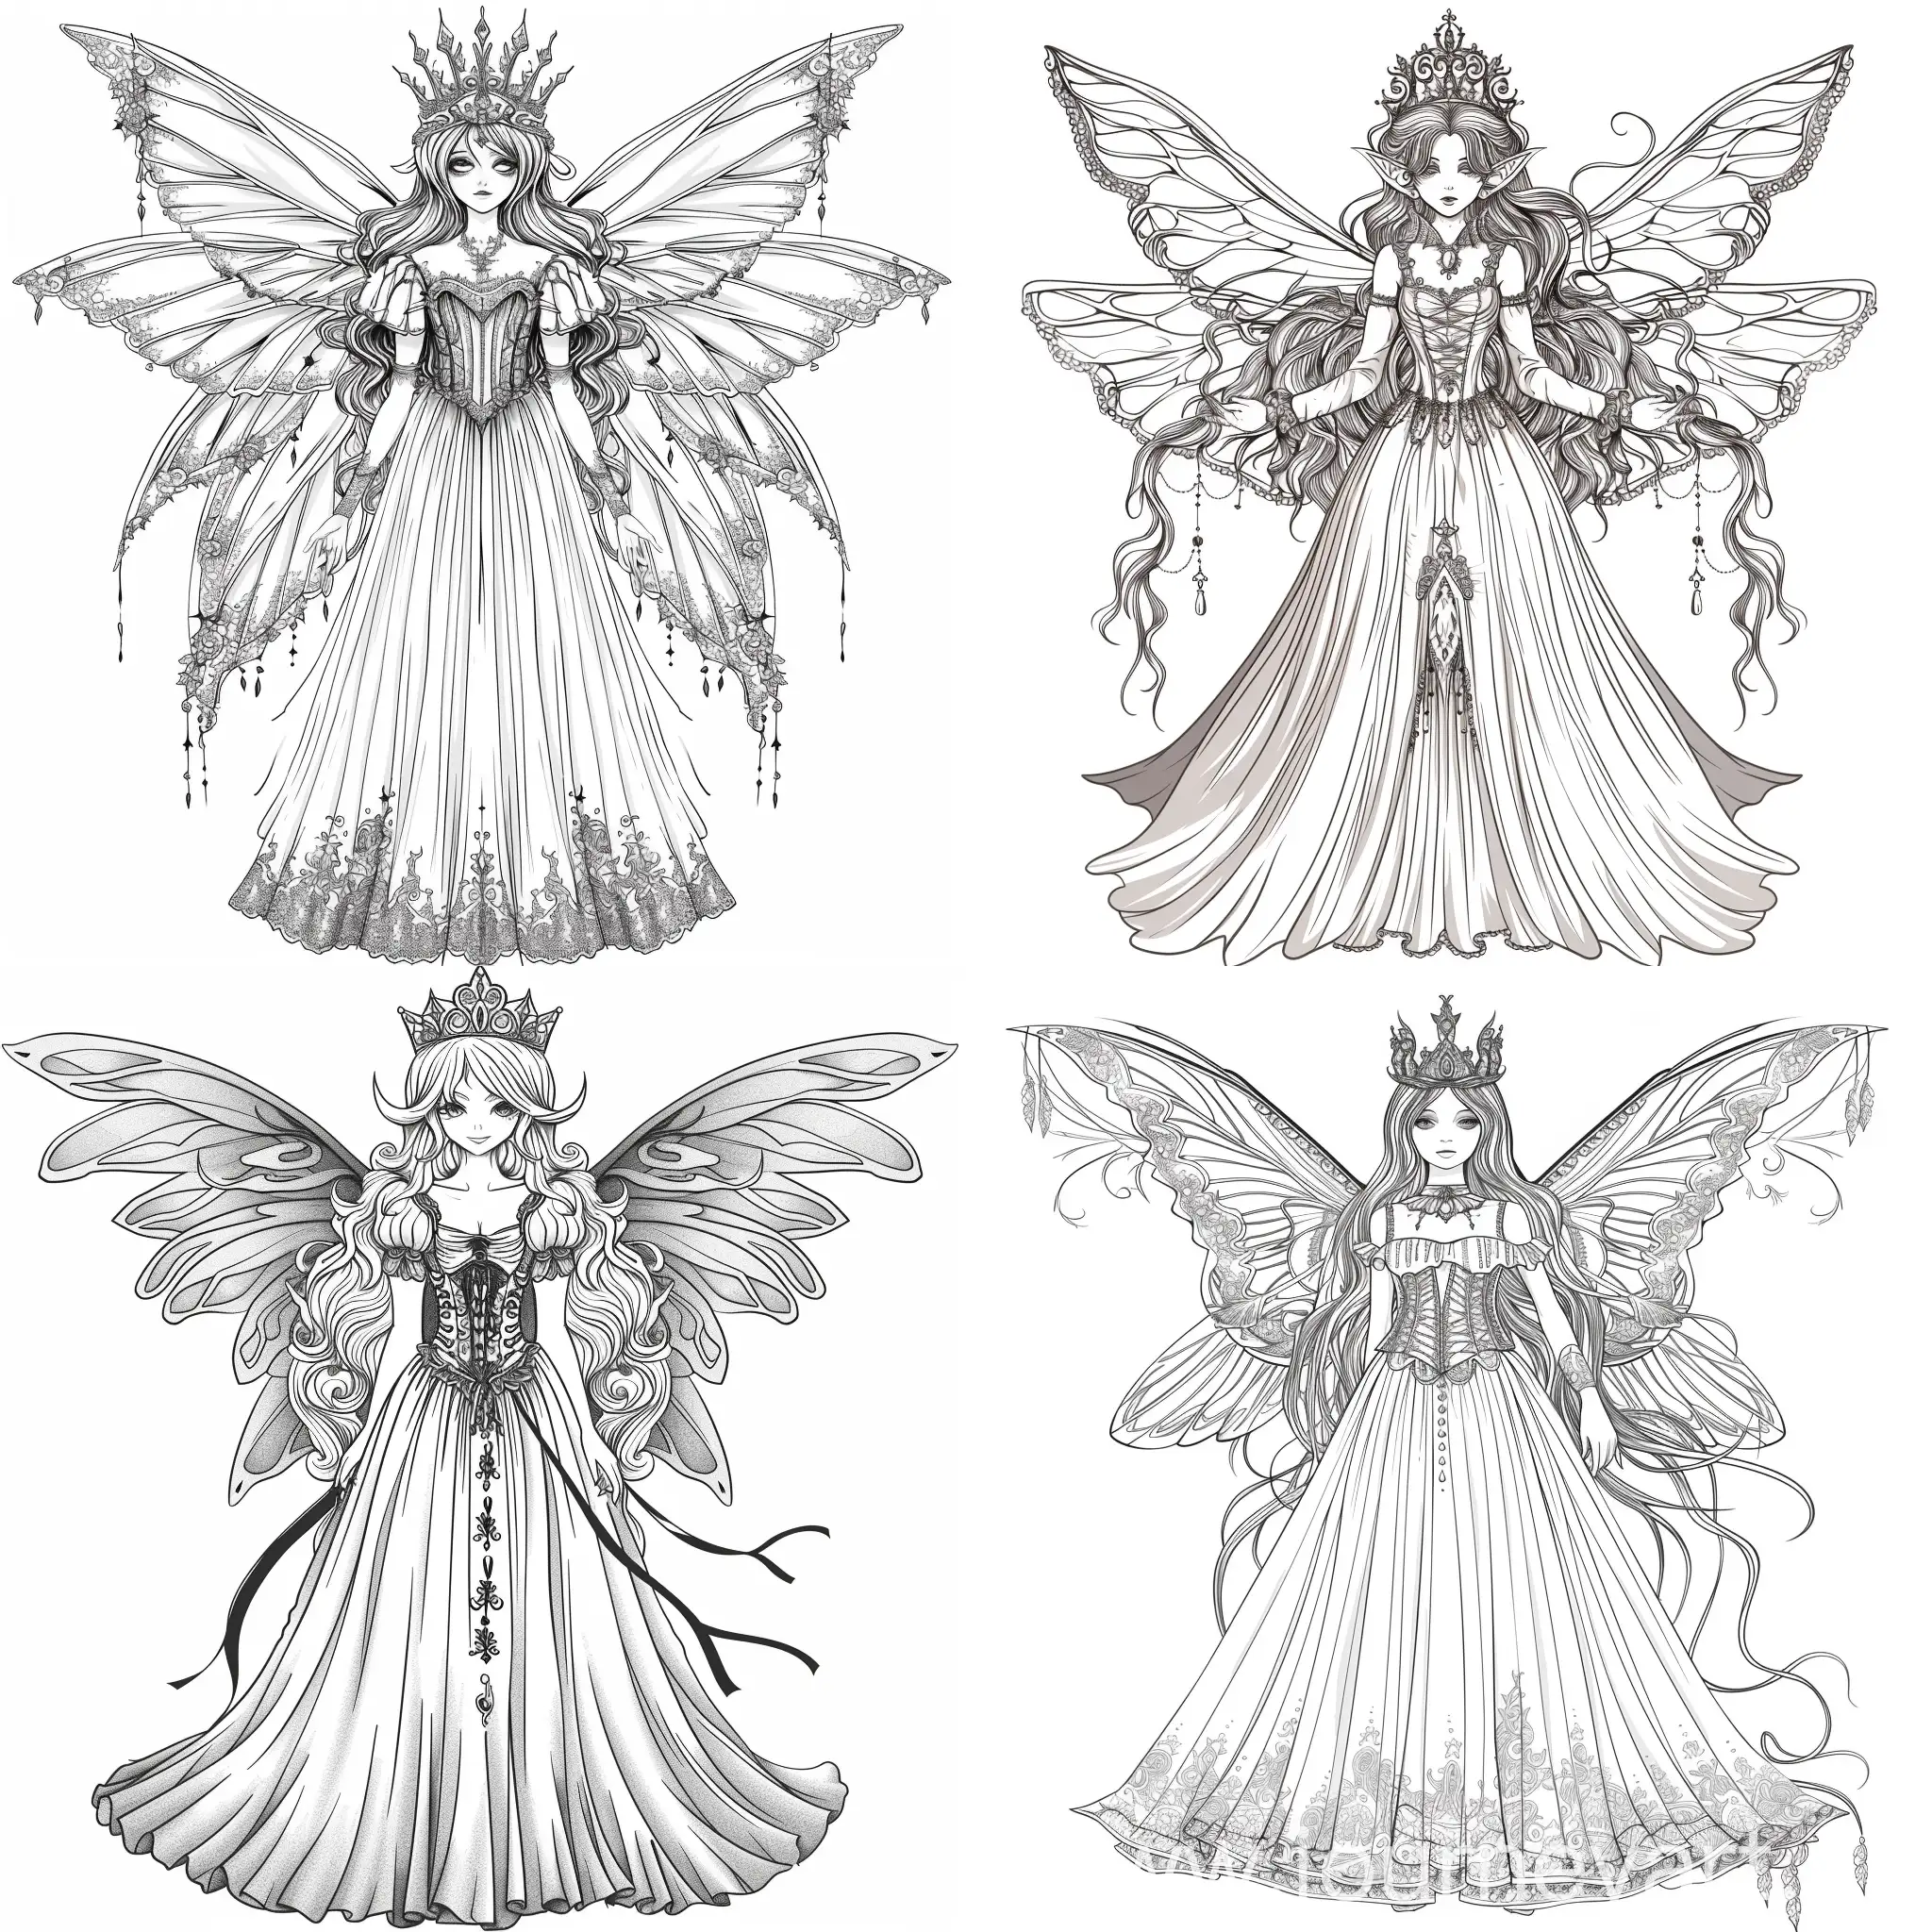 Coloring book for adults, fairy with soft wings, long hair and detailed long dress with gothic crown